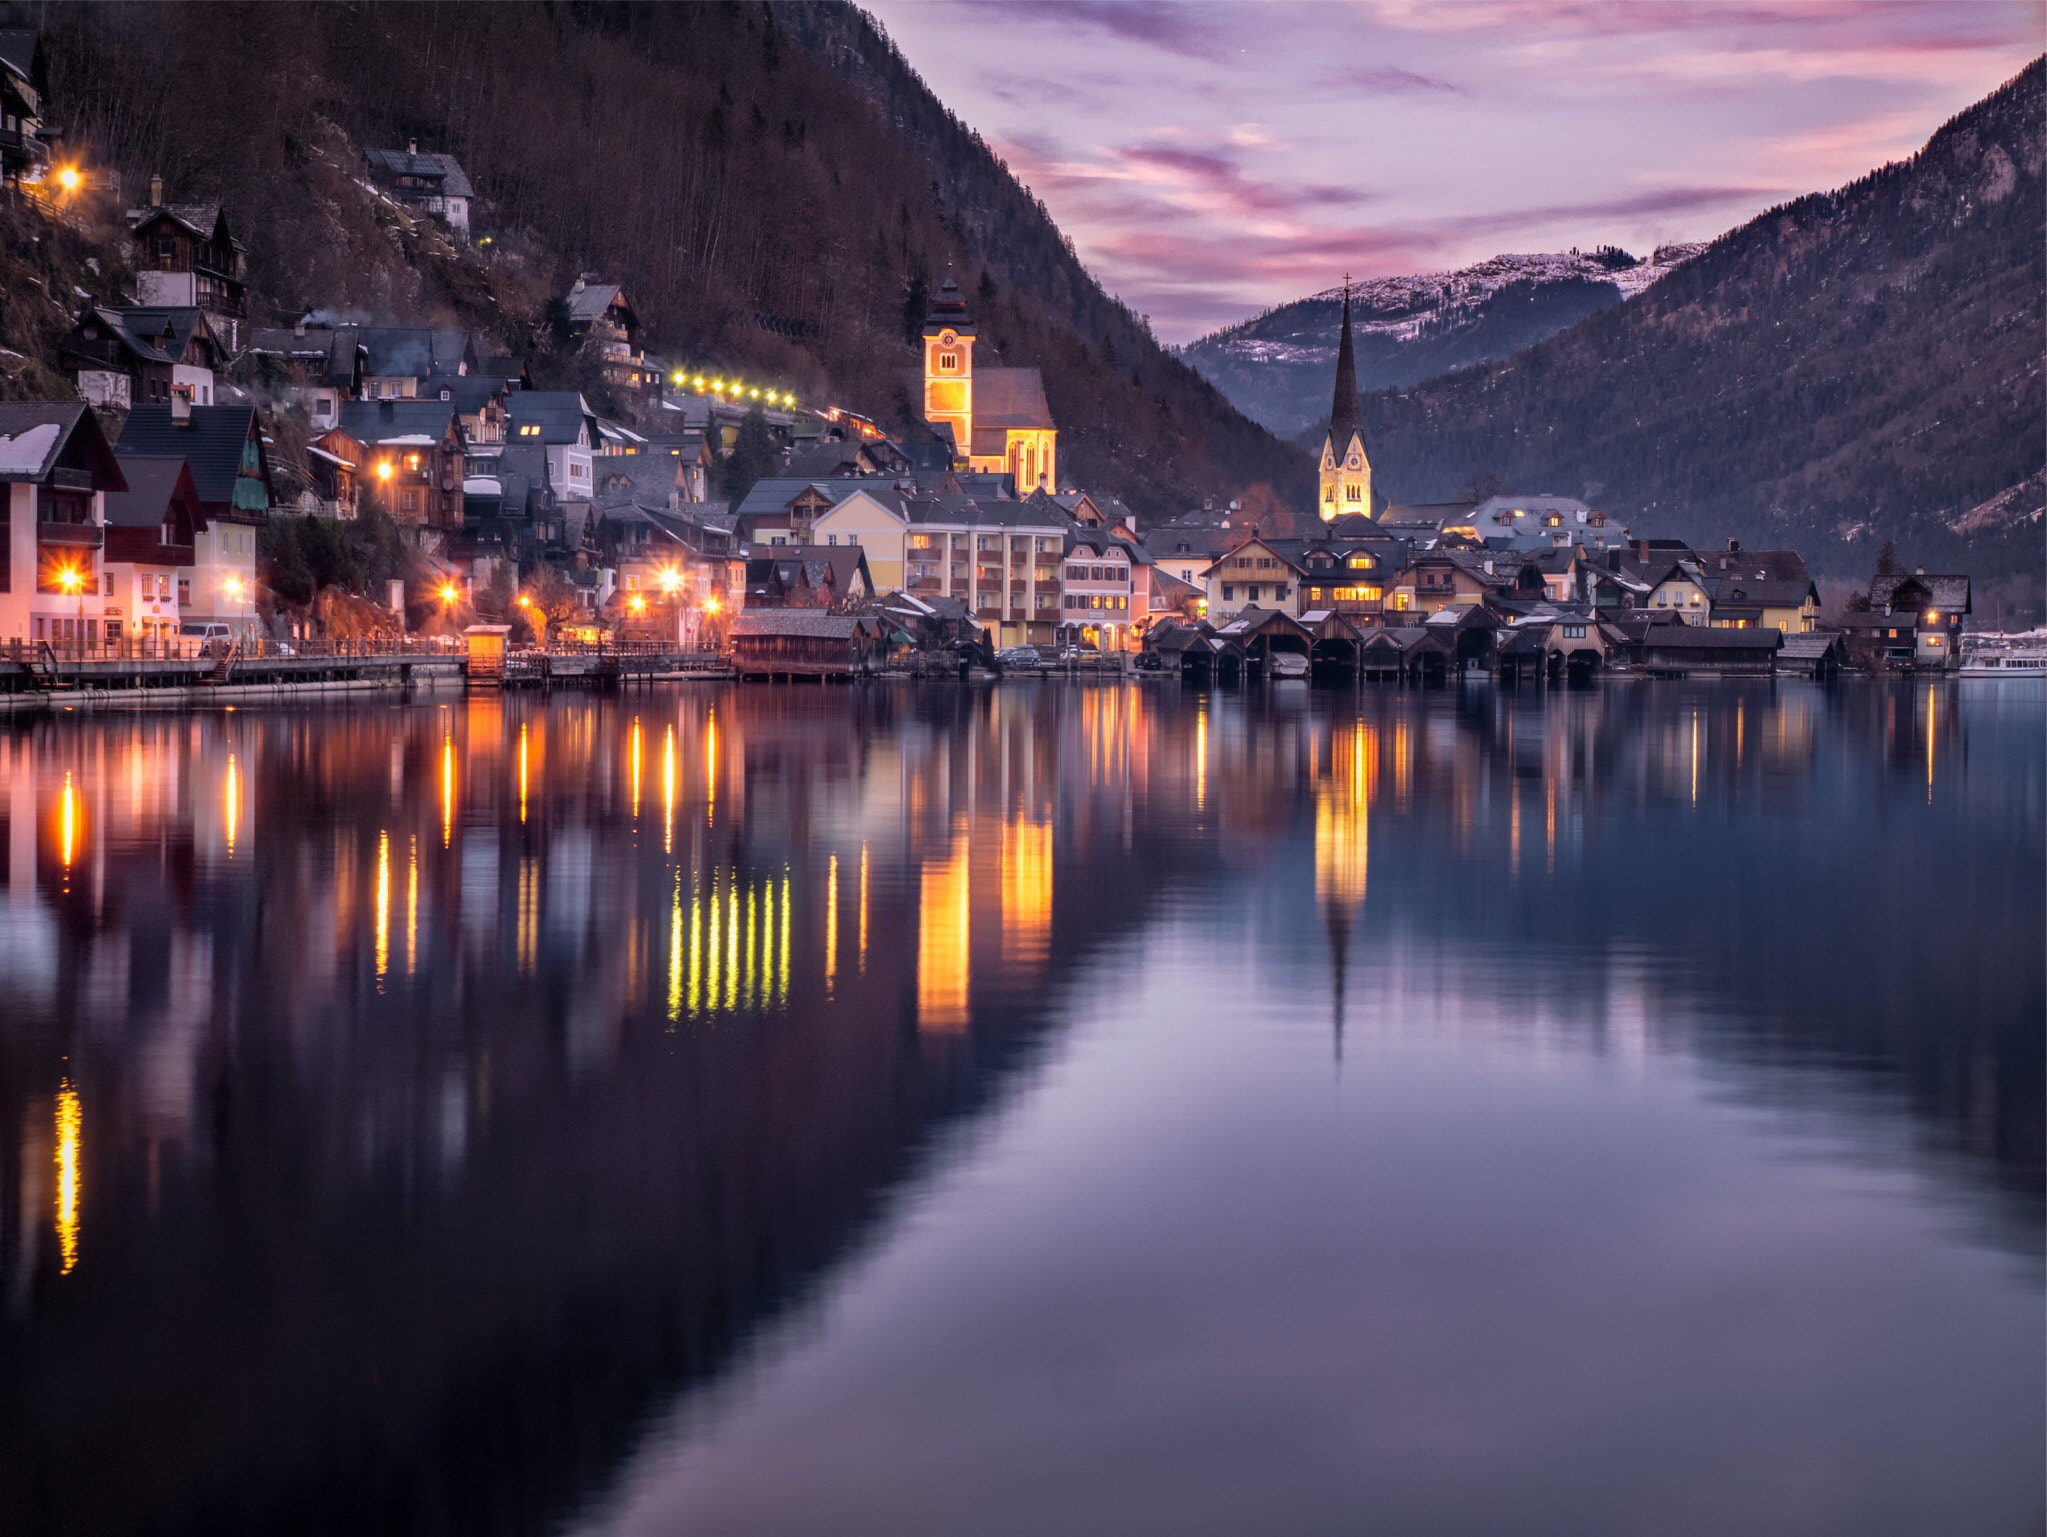 Panasonic Lumix DMC-GX7 sample photo. My first time in hallstatt and wow, i see why this ... photography